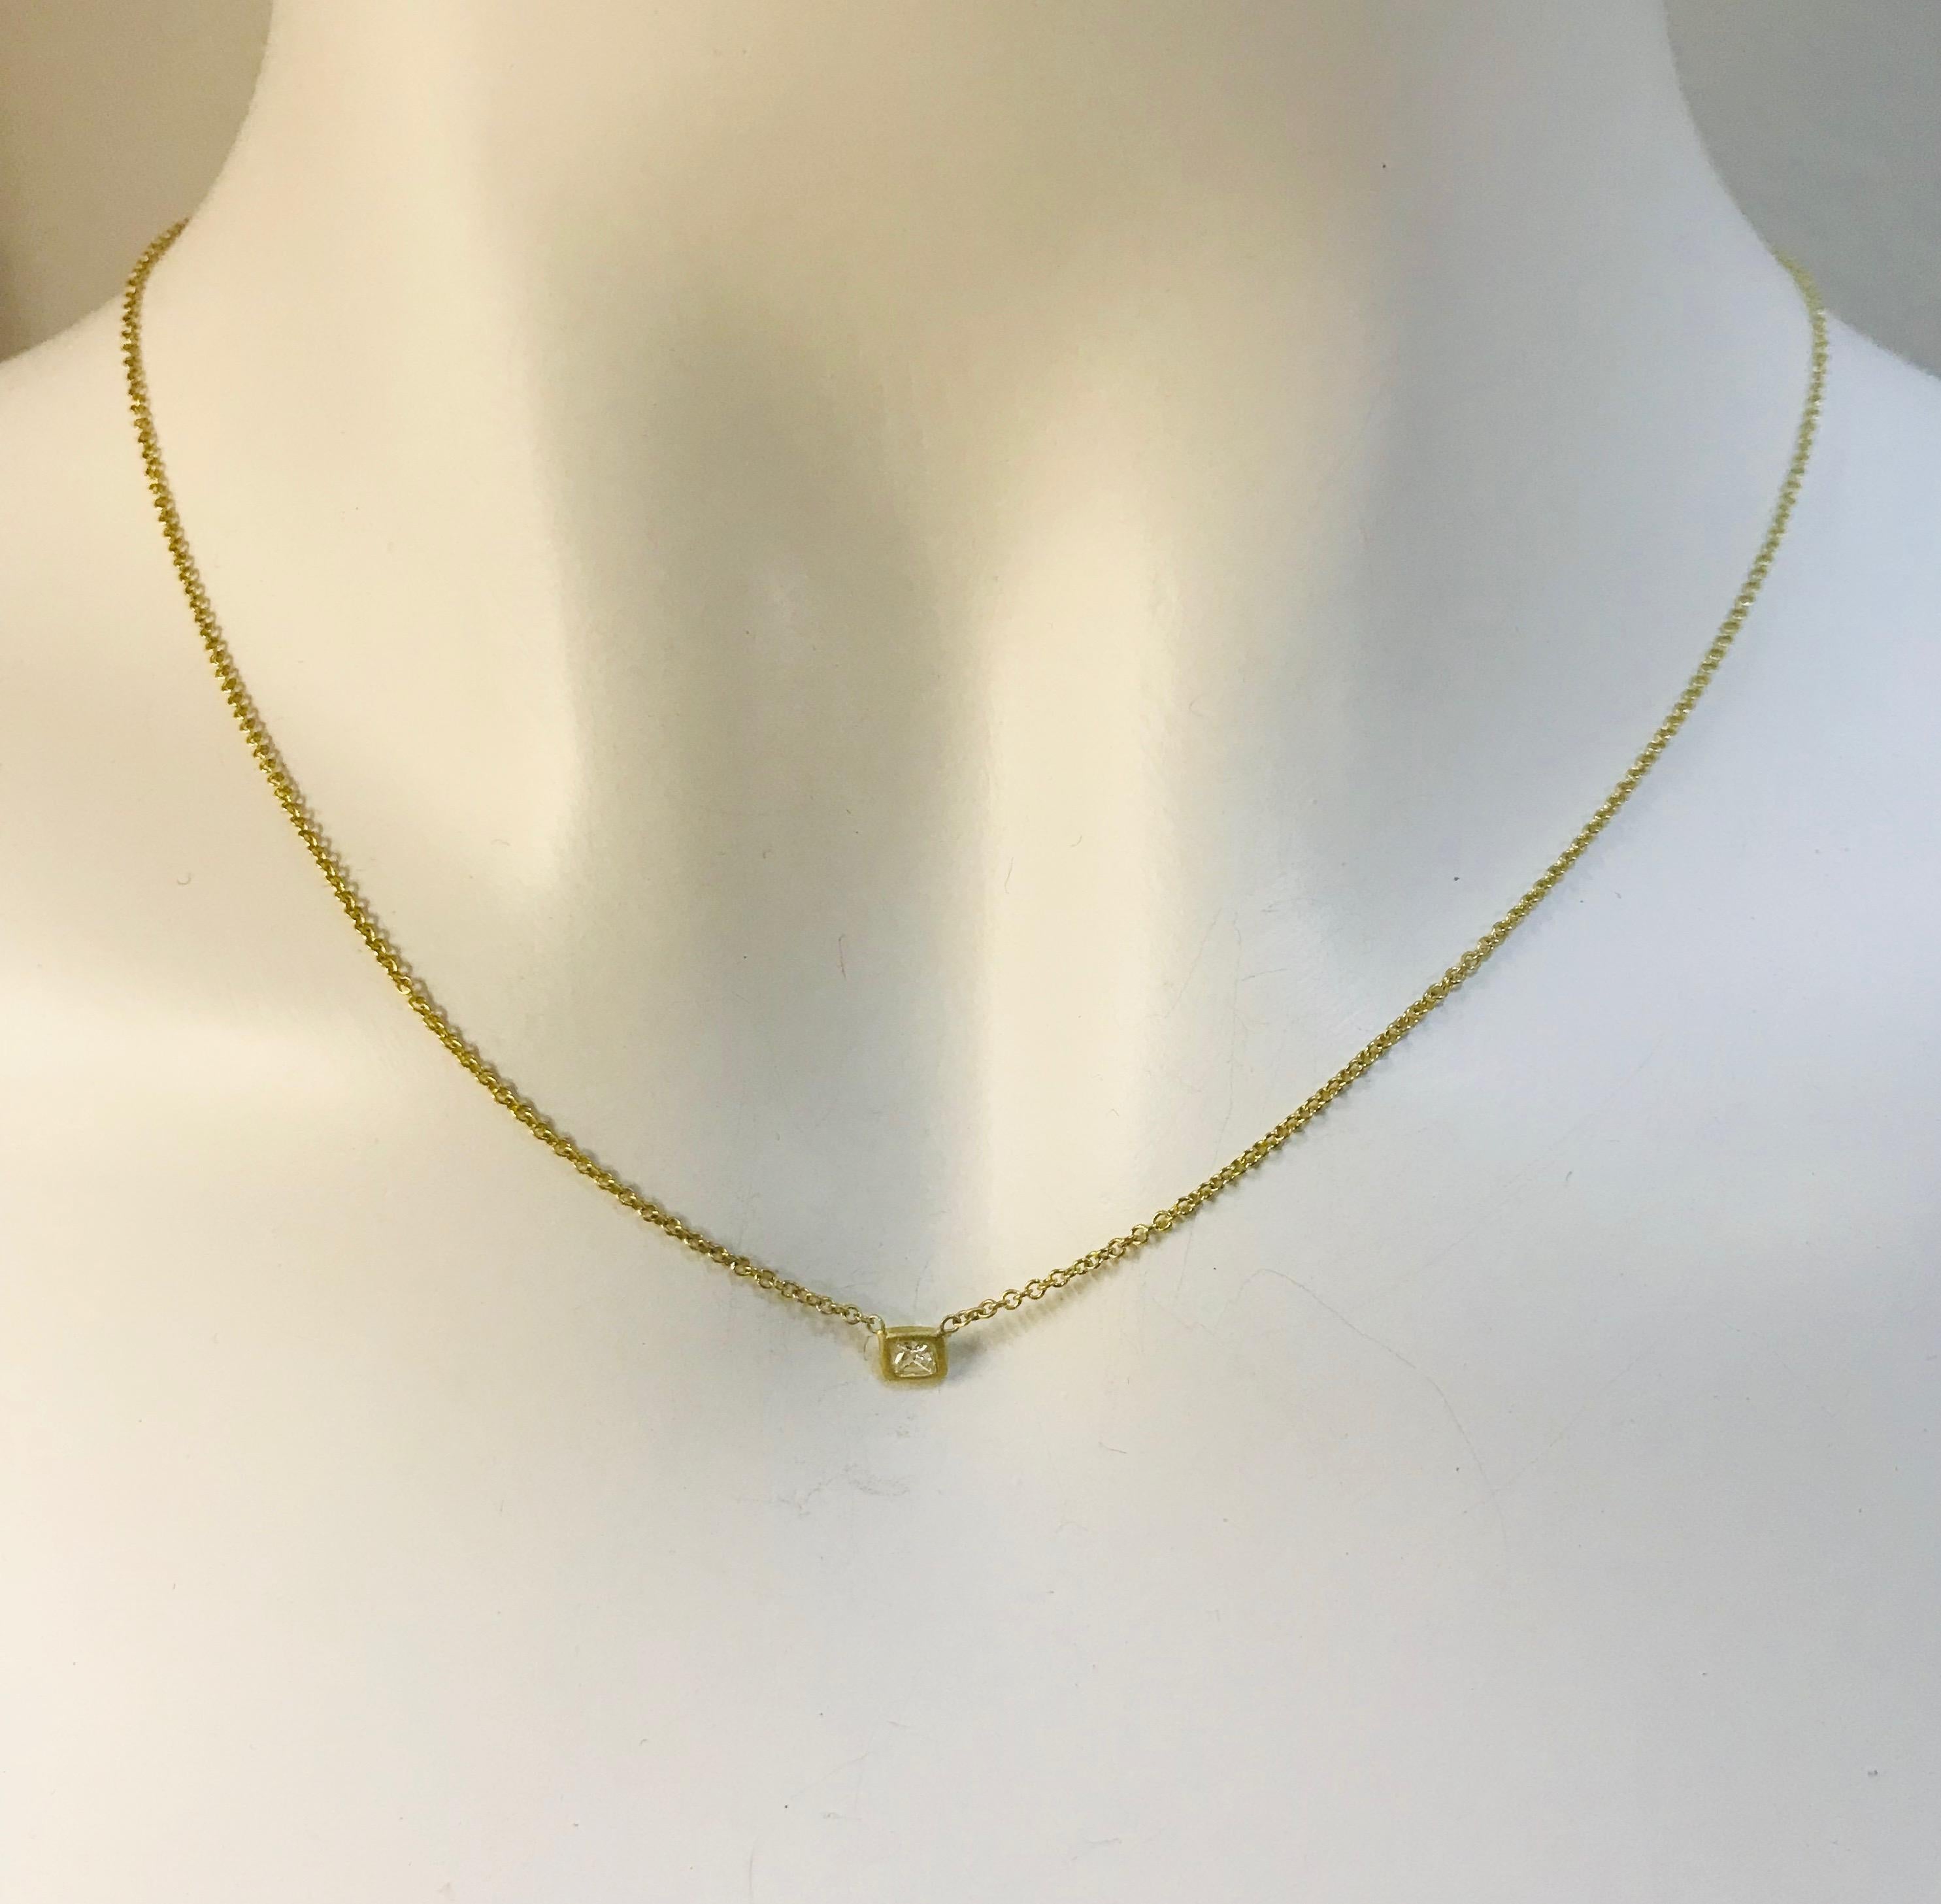 Faye Kim 18k Gold Princess Cut Diamond Solitaire Necklace

It's the perfect necklace for a special birthday, anniversary, graduation or just about any memorable event.   Set in 18k gold,  the matte finish makes the diamond really sparkle.  Delicate